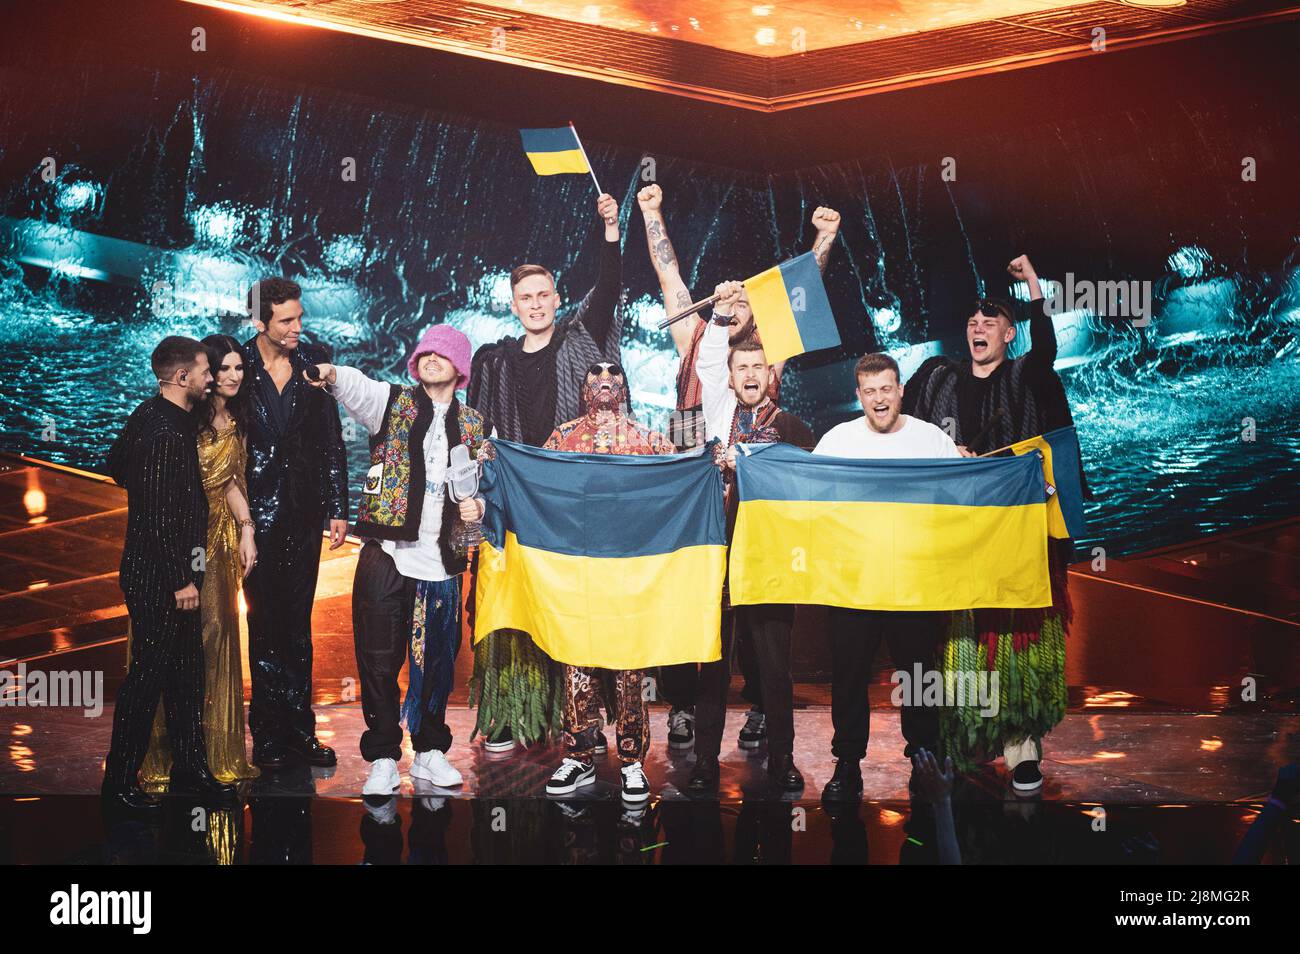 TORINO, PALA OLIMPICO, MAY 10th/12th/14th 2022: Kalush Orchestra, winners of the 2022 edition representing Ukraine, celebrating live on stage for the 66th edition of the Eurovision Song Contest. Stock Photo